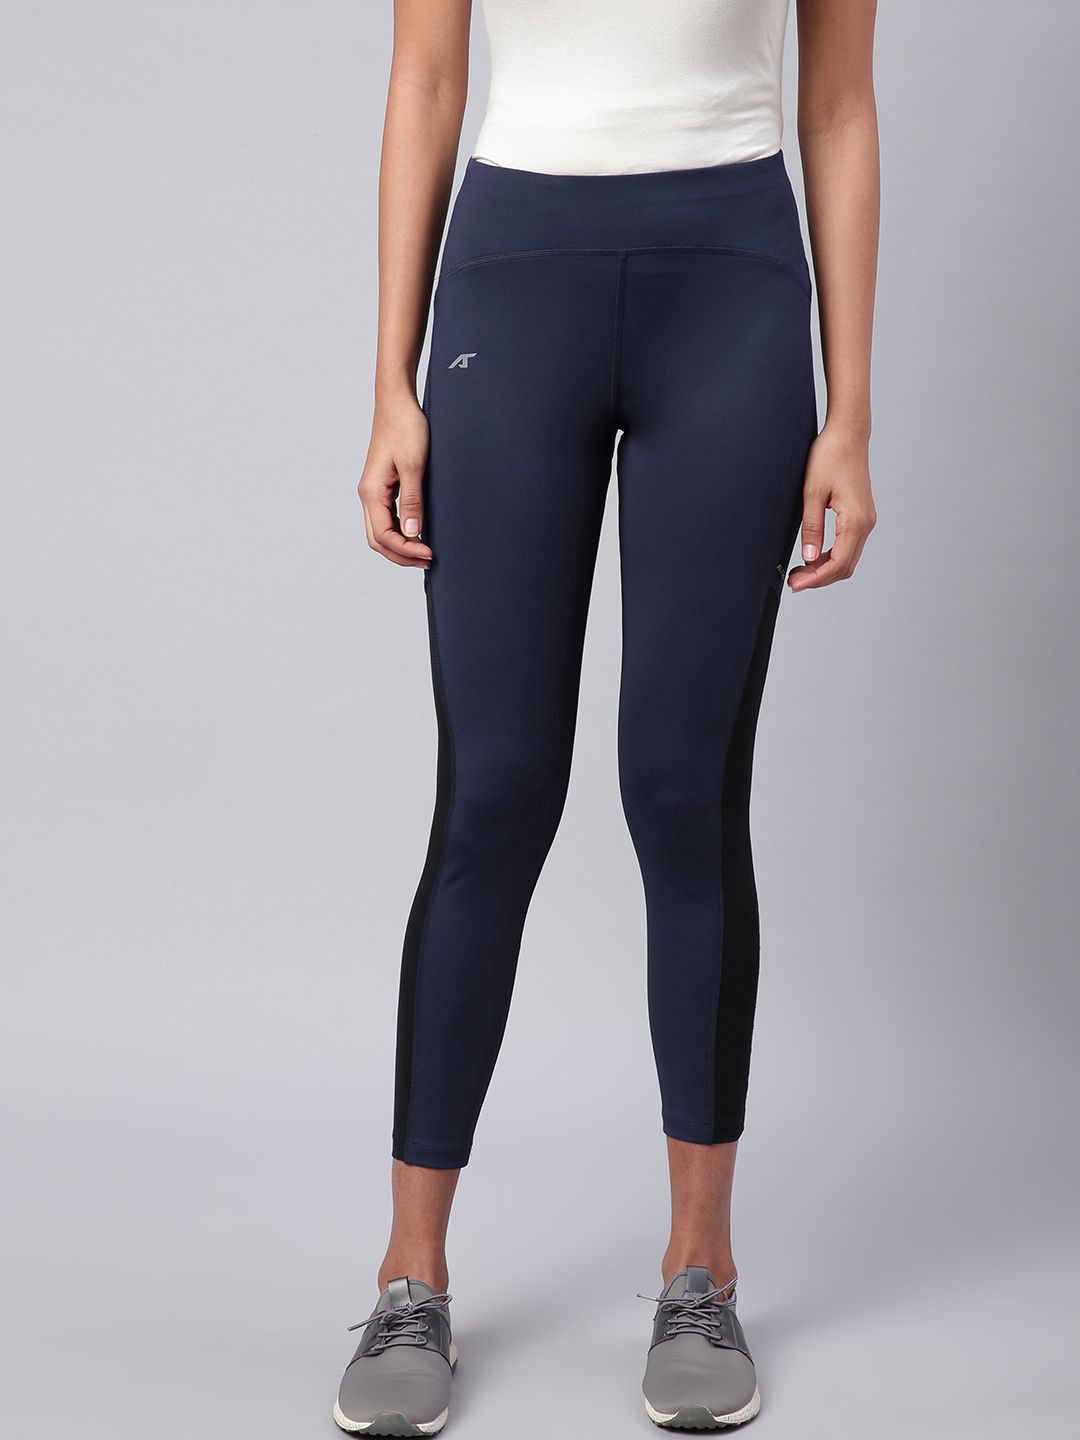 Alcis Women Navy Solid Training Tights Price in India